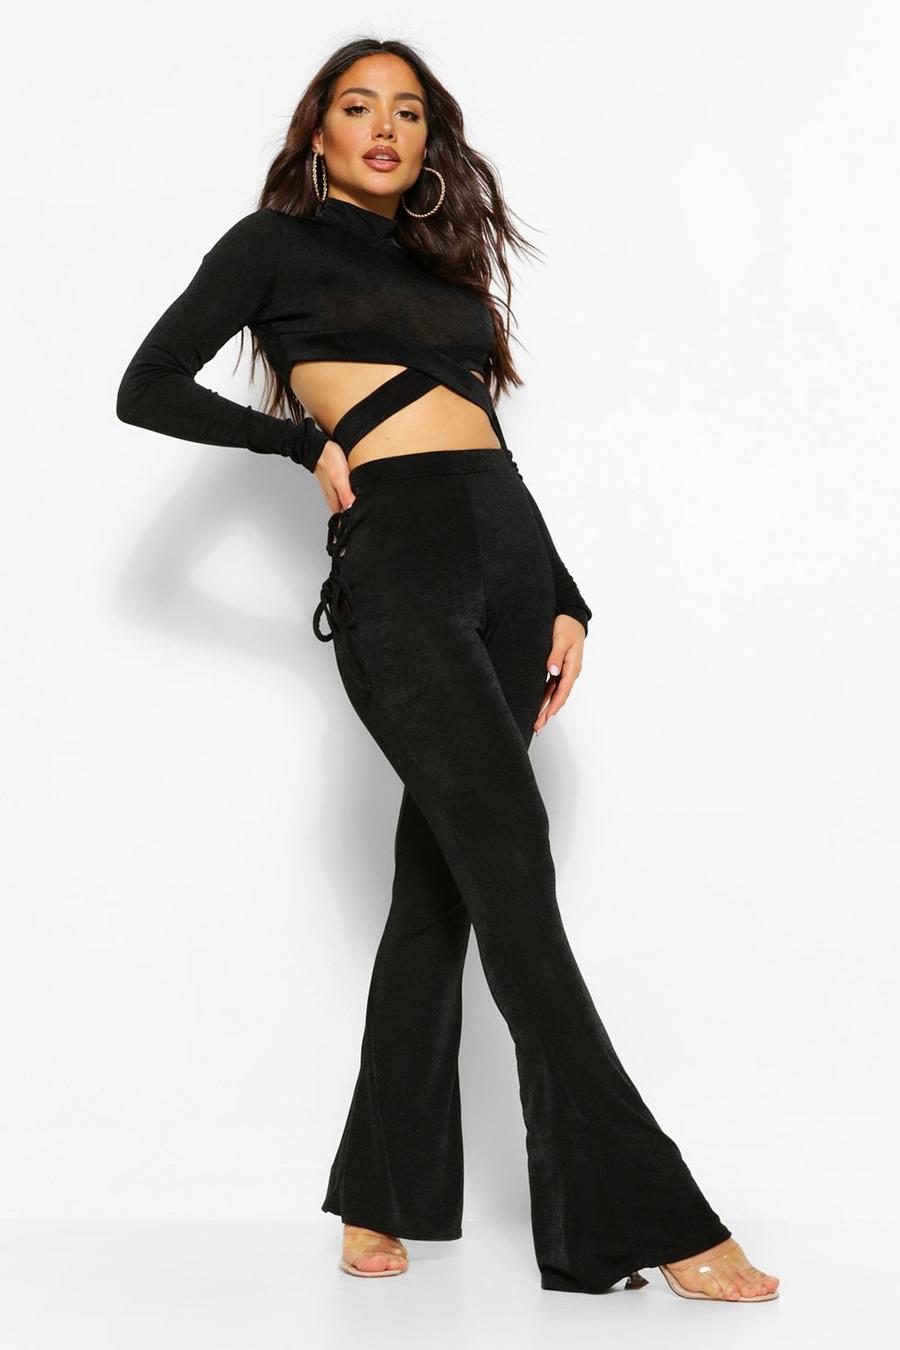 Lace Up Textured Slinky Flared Pants